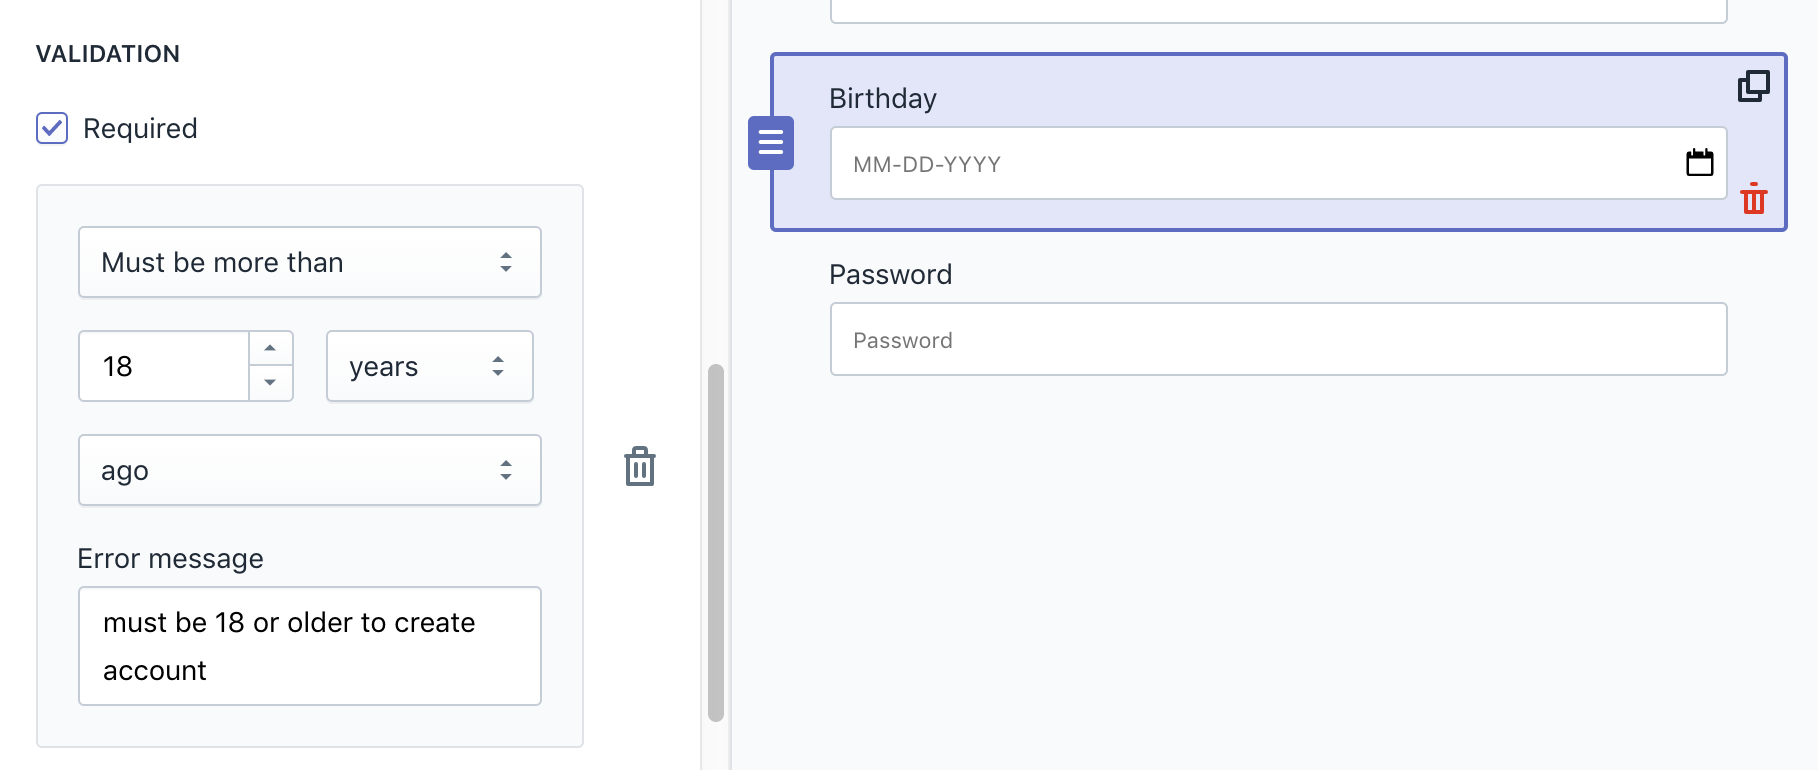 Field validation for custom registration forms on Shopify